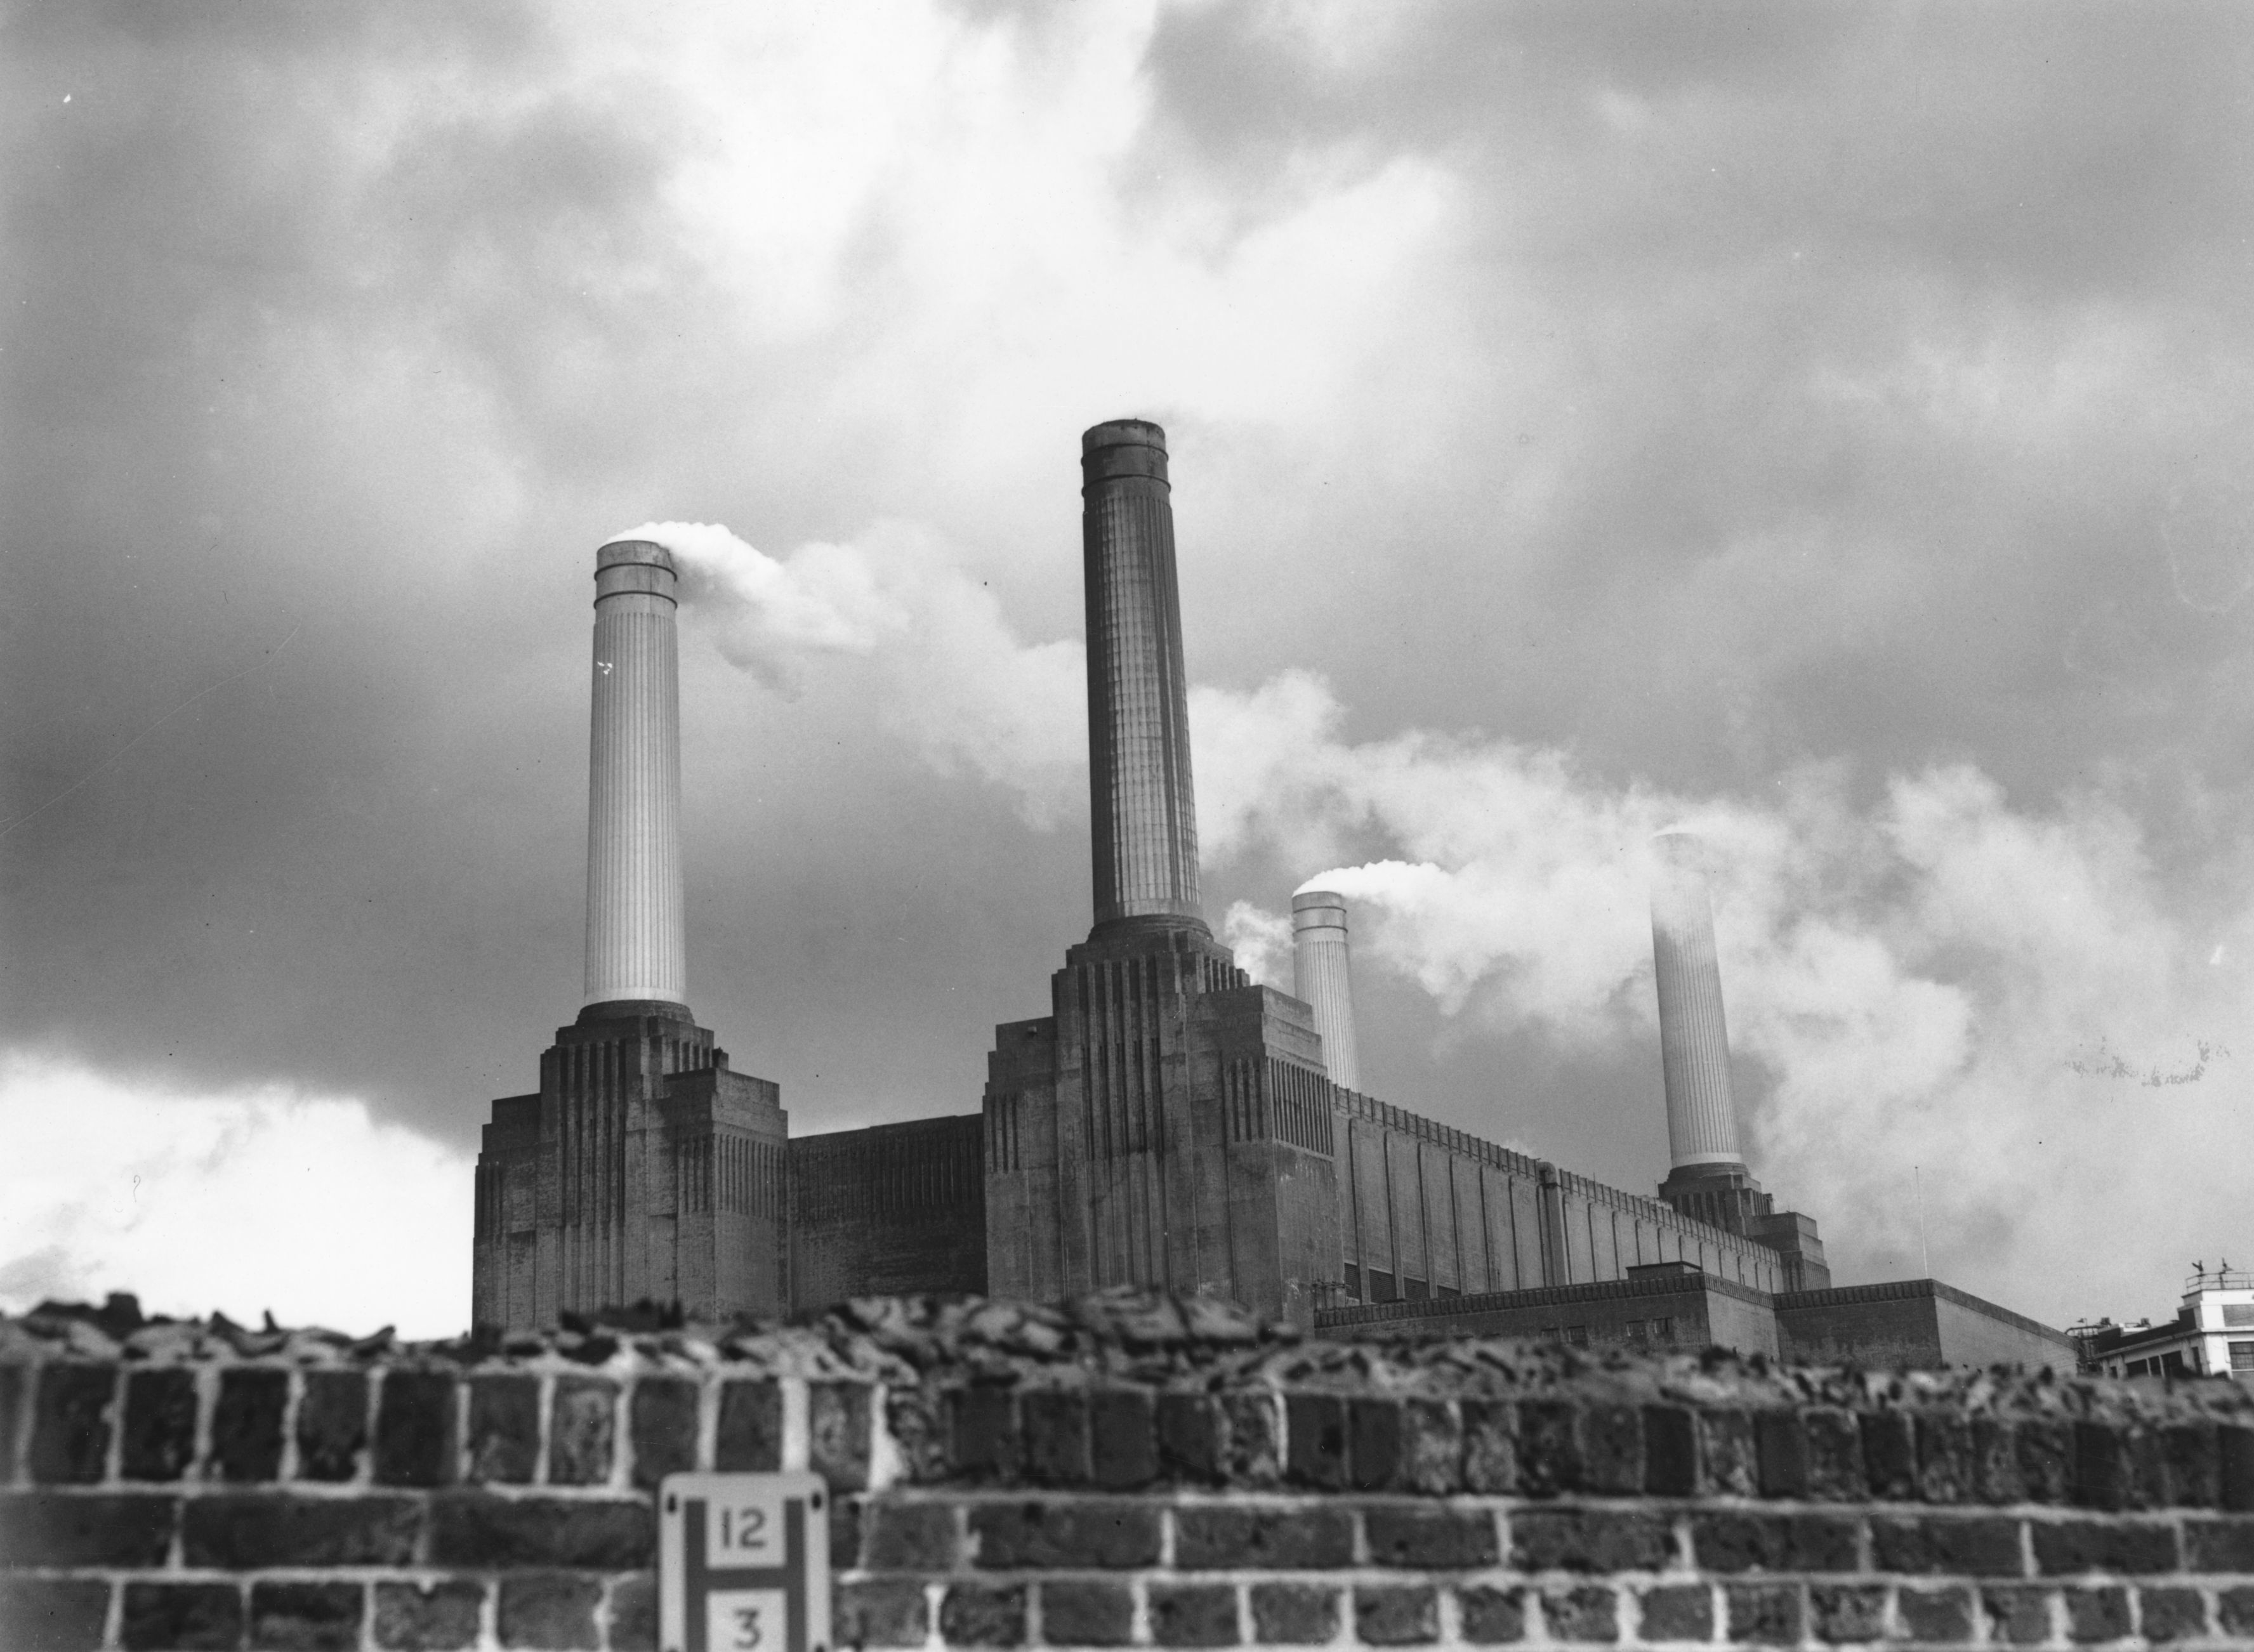 The Gothic-style towers of Battersea Power Station, on the bank of the River Thames. Designed by leading architect Giles Scott, the impressive building is due for closure in 1983. (Photo by Hales/Getty Images)